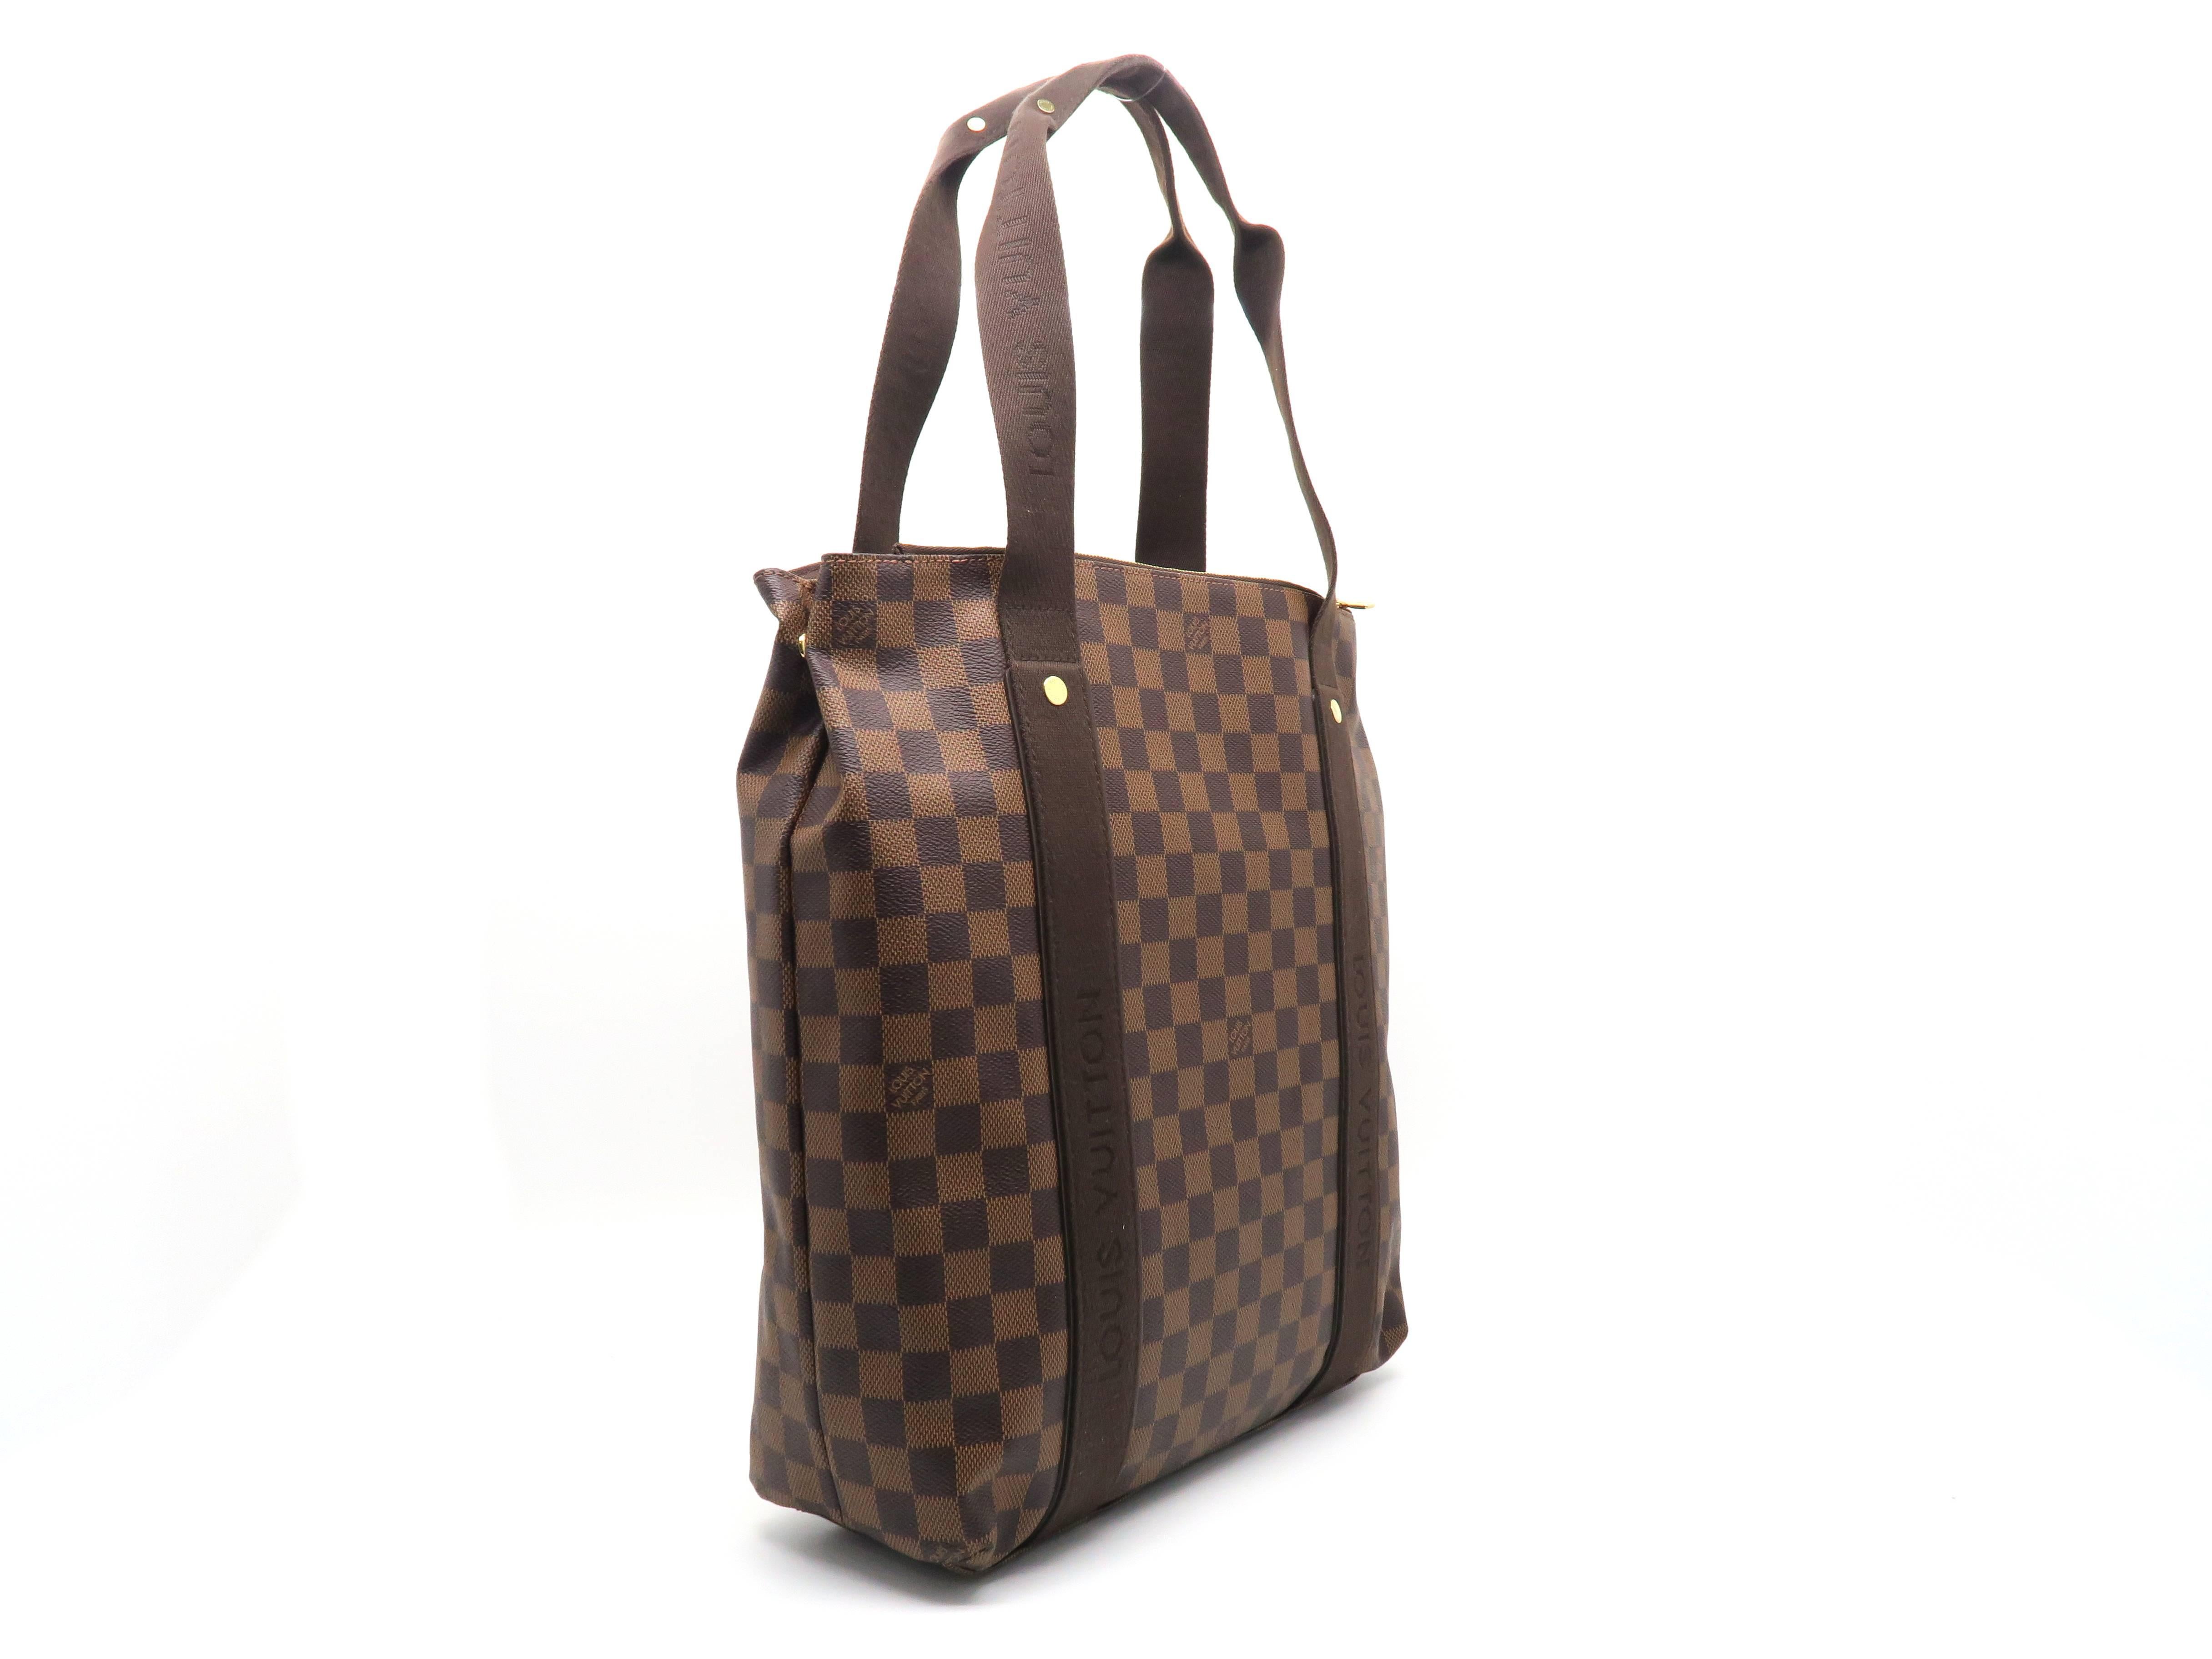 Color: Brown
Material: Damier

Condition: Rank A
Overall: Good, few minor defects 
Surface: Minor Scratches
Corners : Minor Scratches 
Edges: Minor Scratches 
Handles/Straps: Minor Scratches
Hardware: Minor Scratches
 

Dimension: W32 × H38 ×